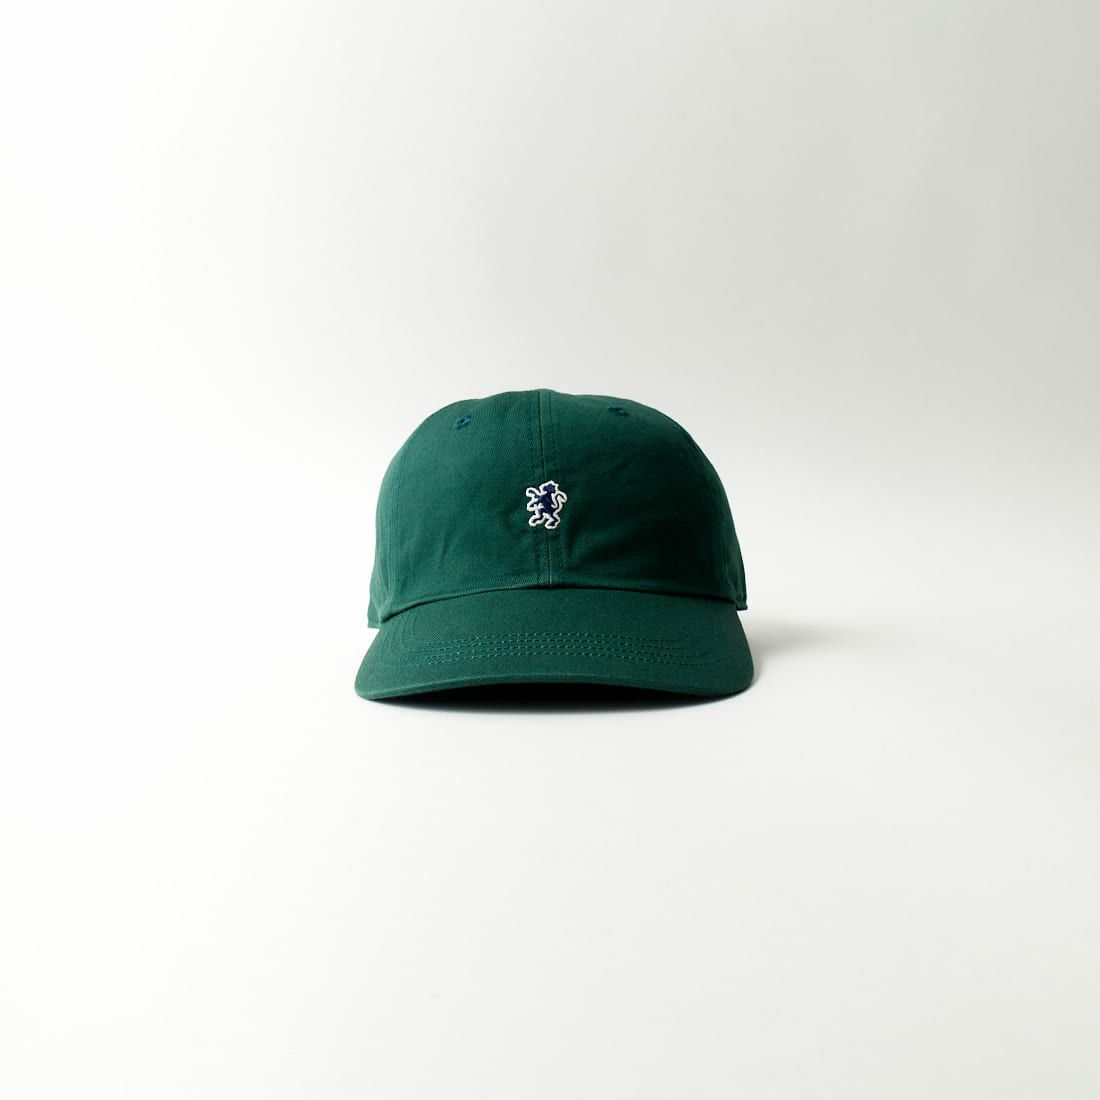 Gymphlex [ジムフレックス] チノクロス 6パネルキャップ [GY-H0253] GREEN